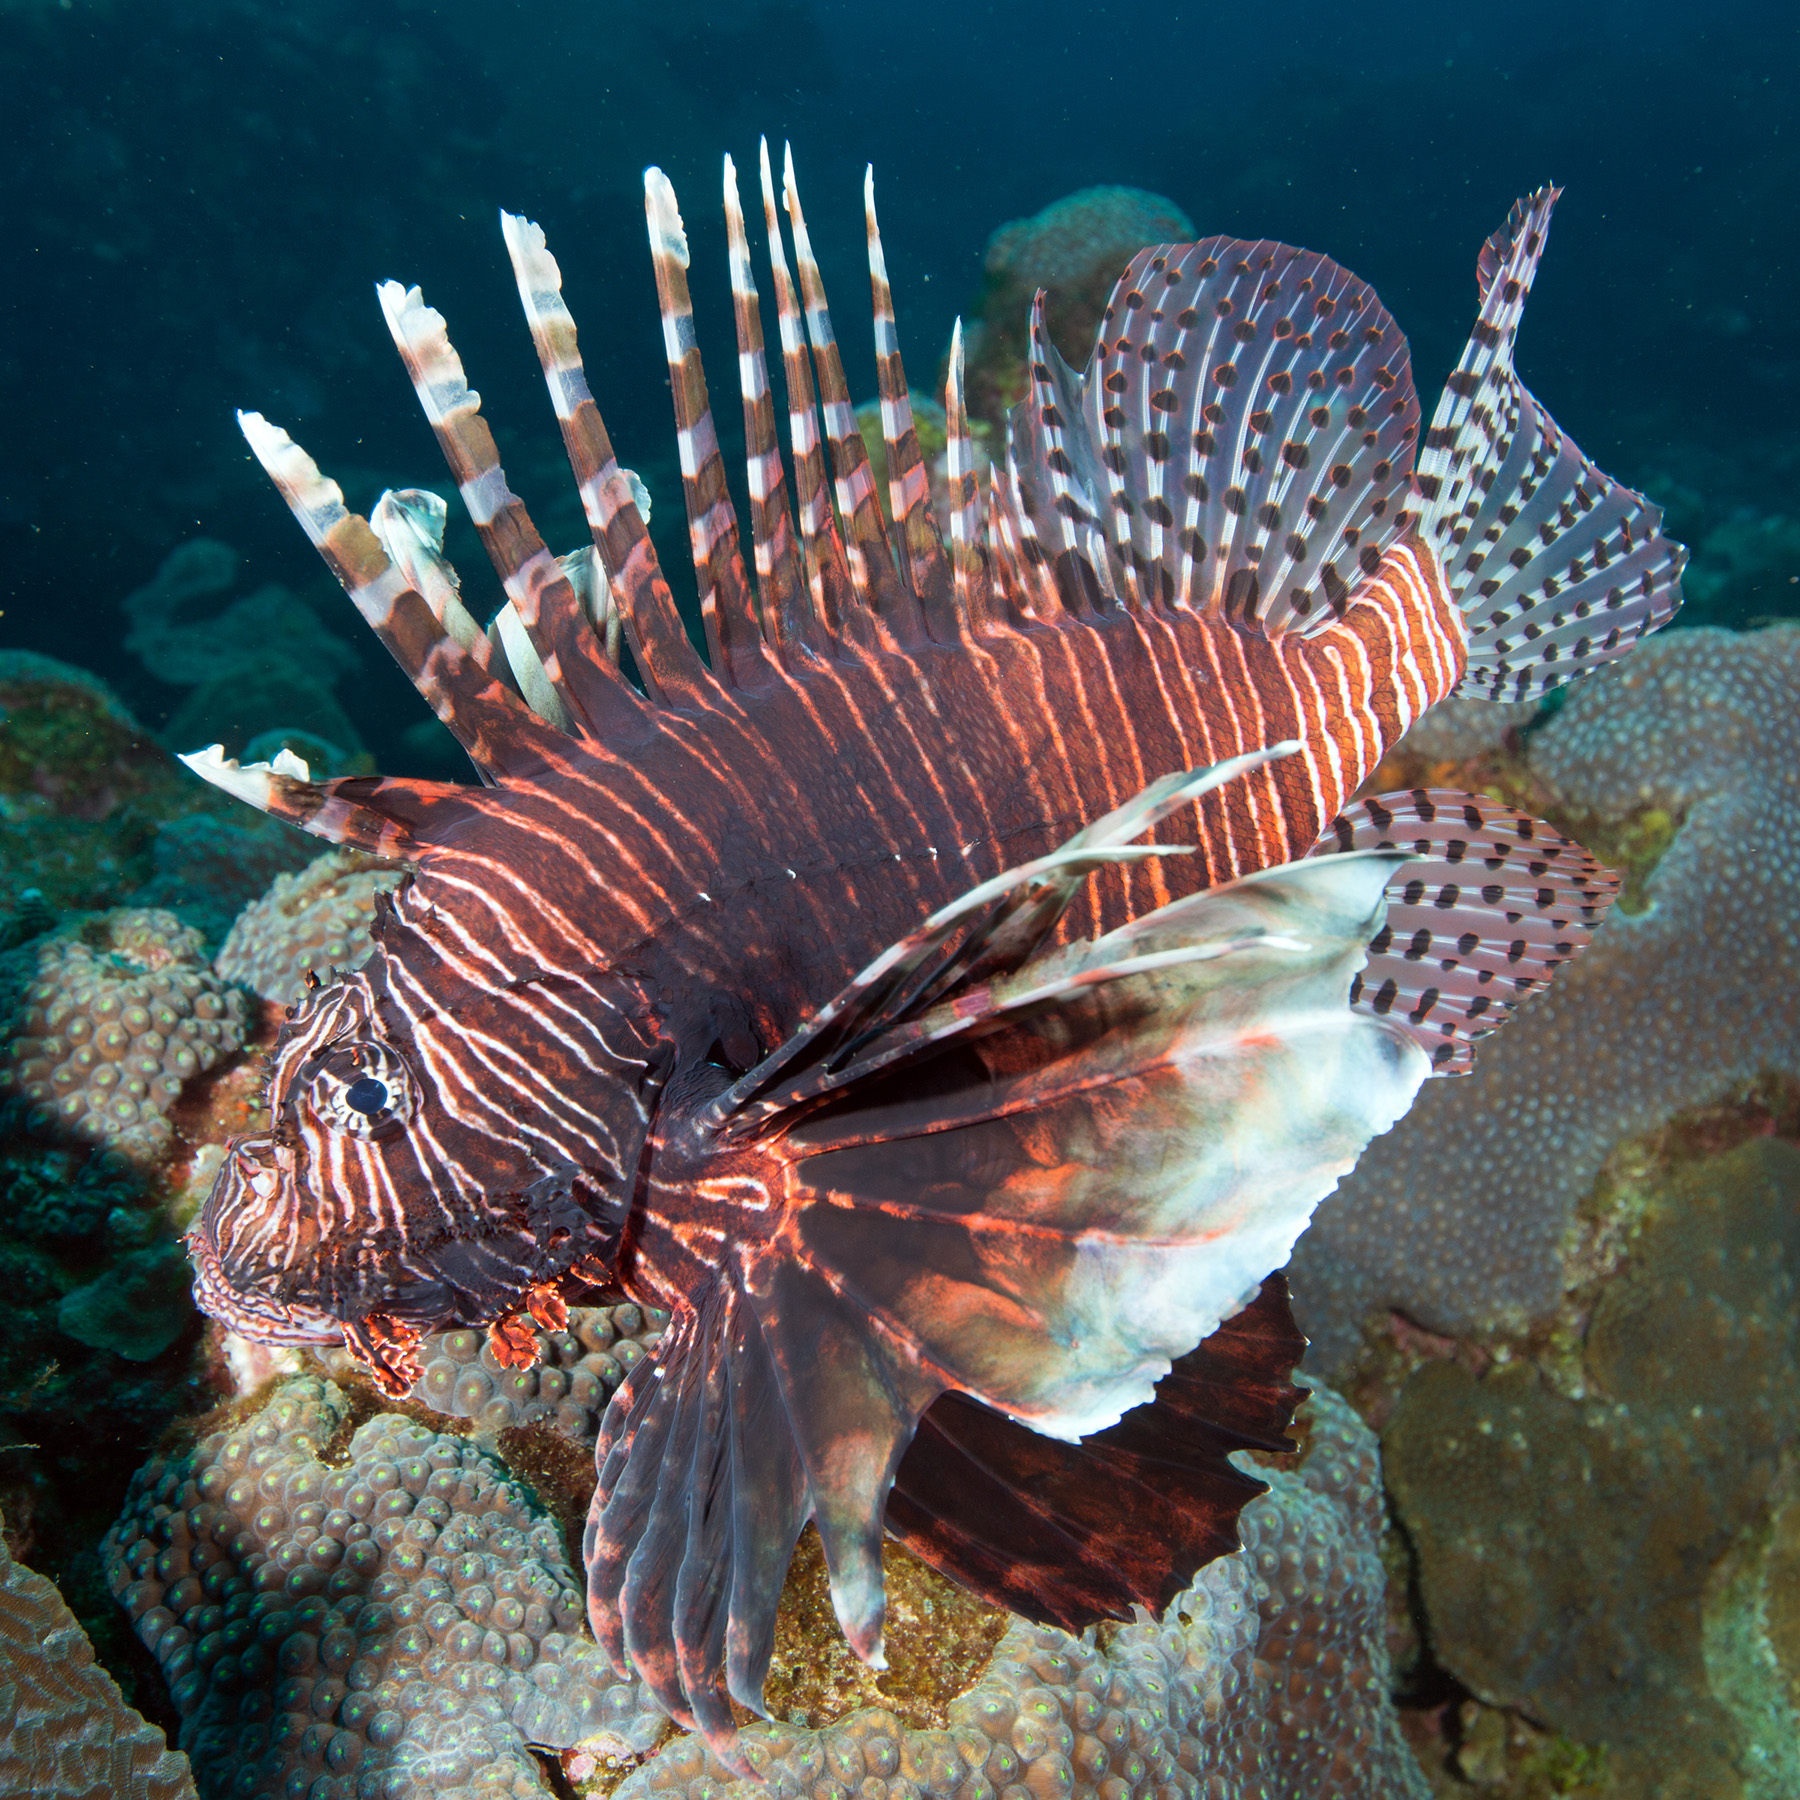 All 100+ Images show me a picture of a lionfish Stunning